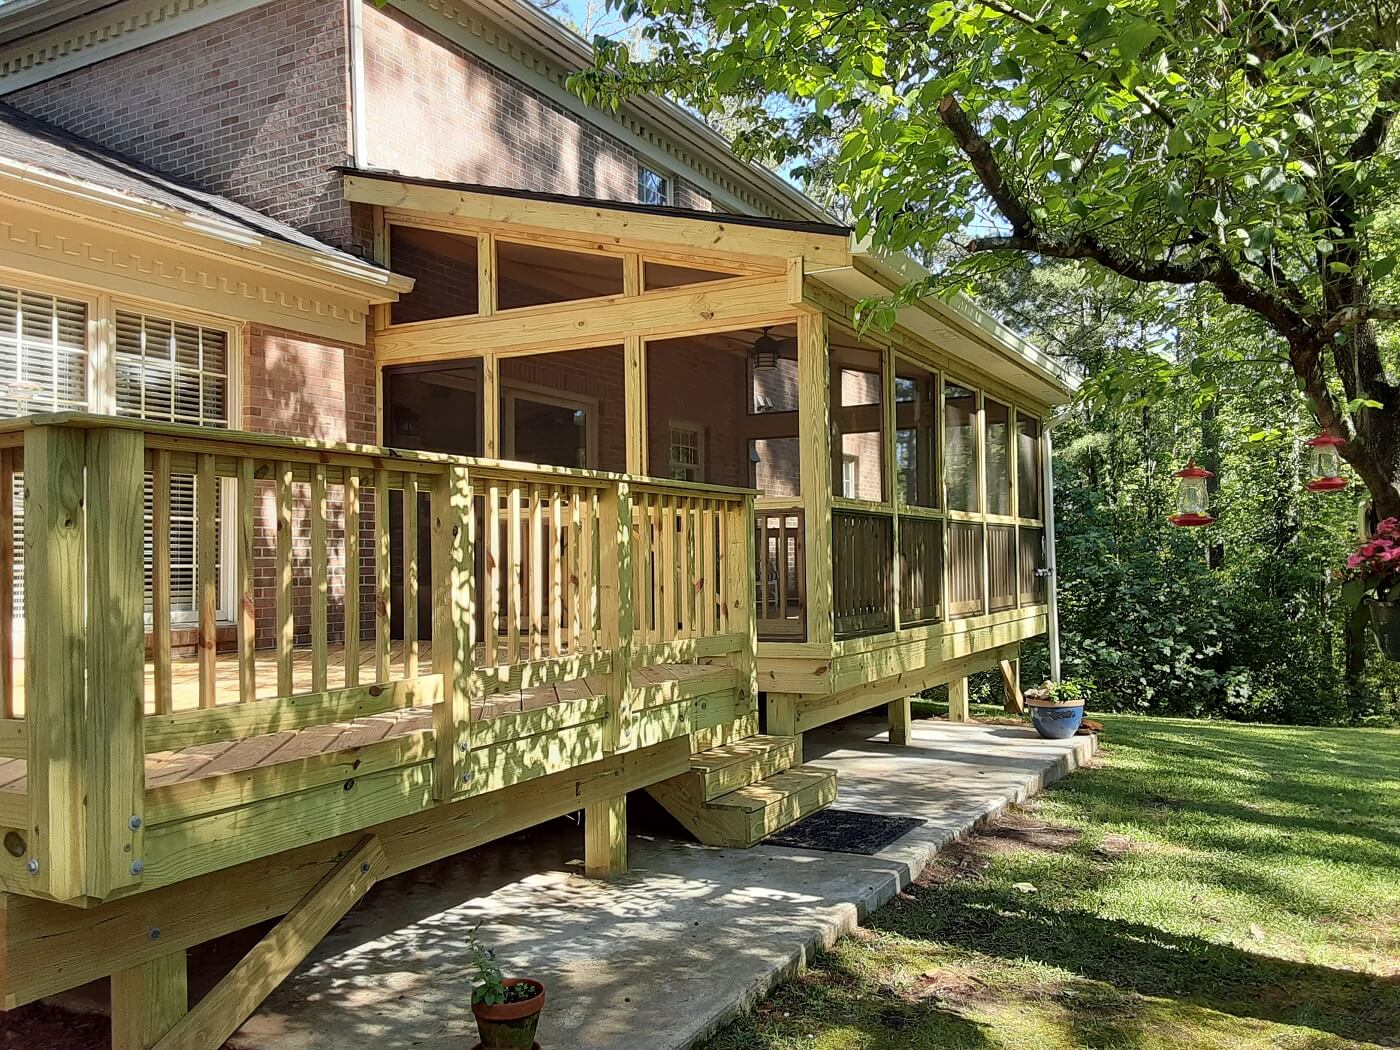 Closer view of screened porch and deck